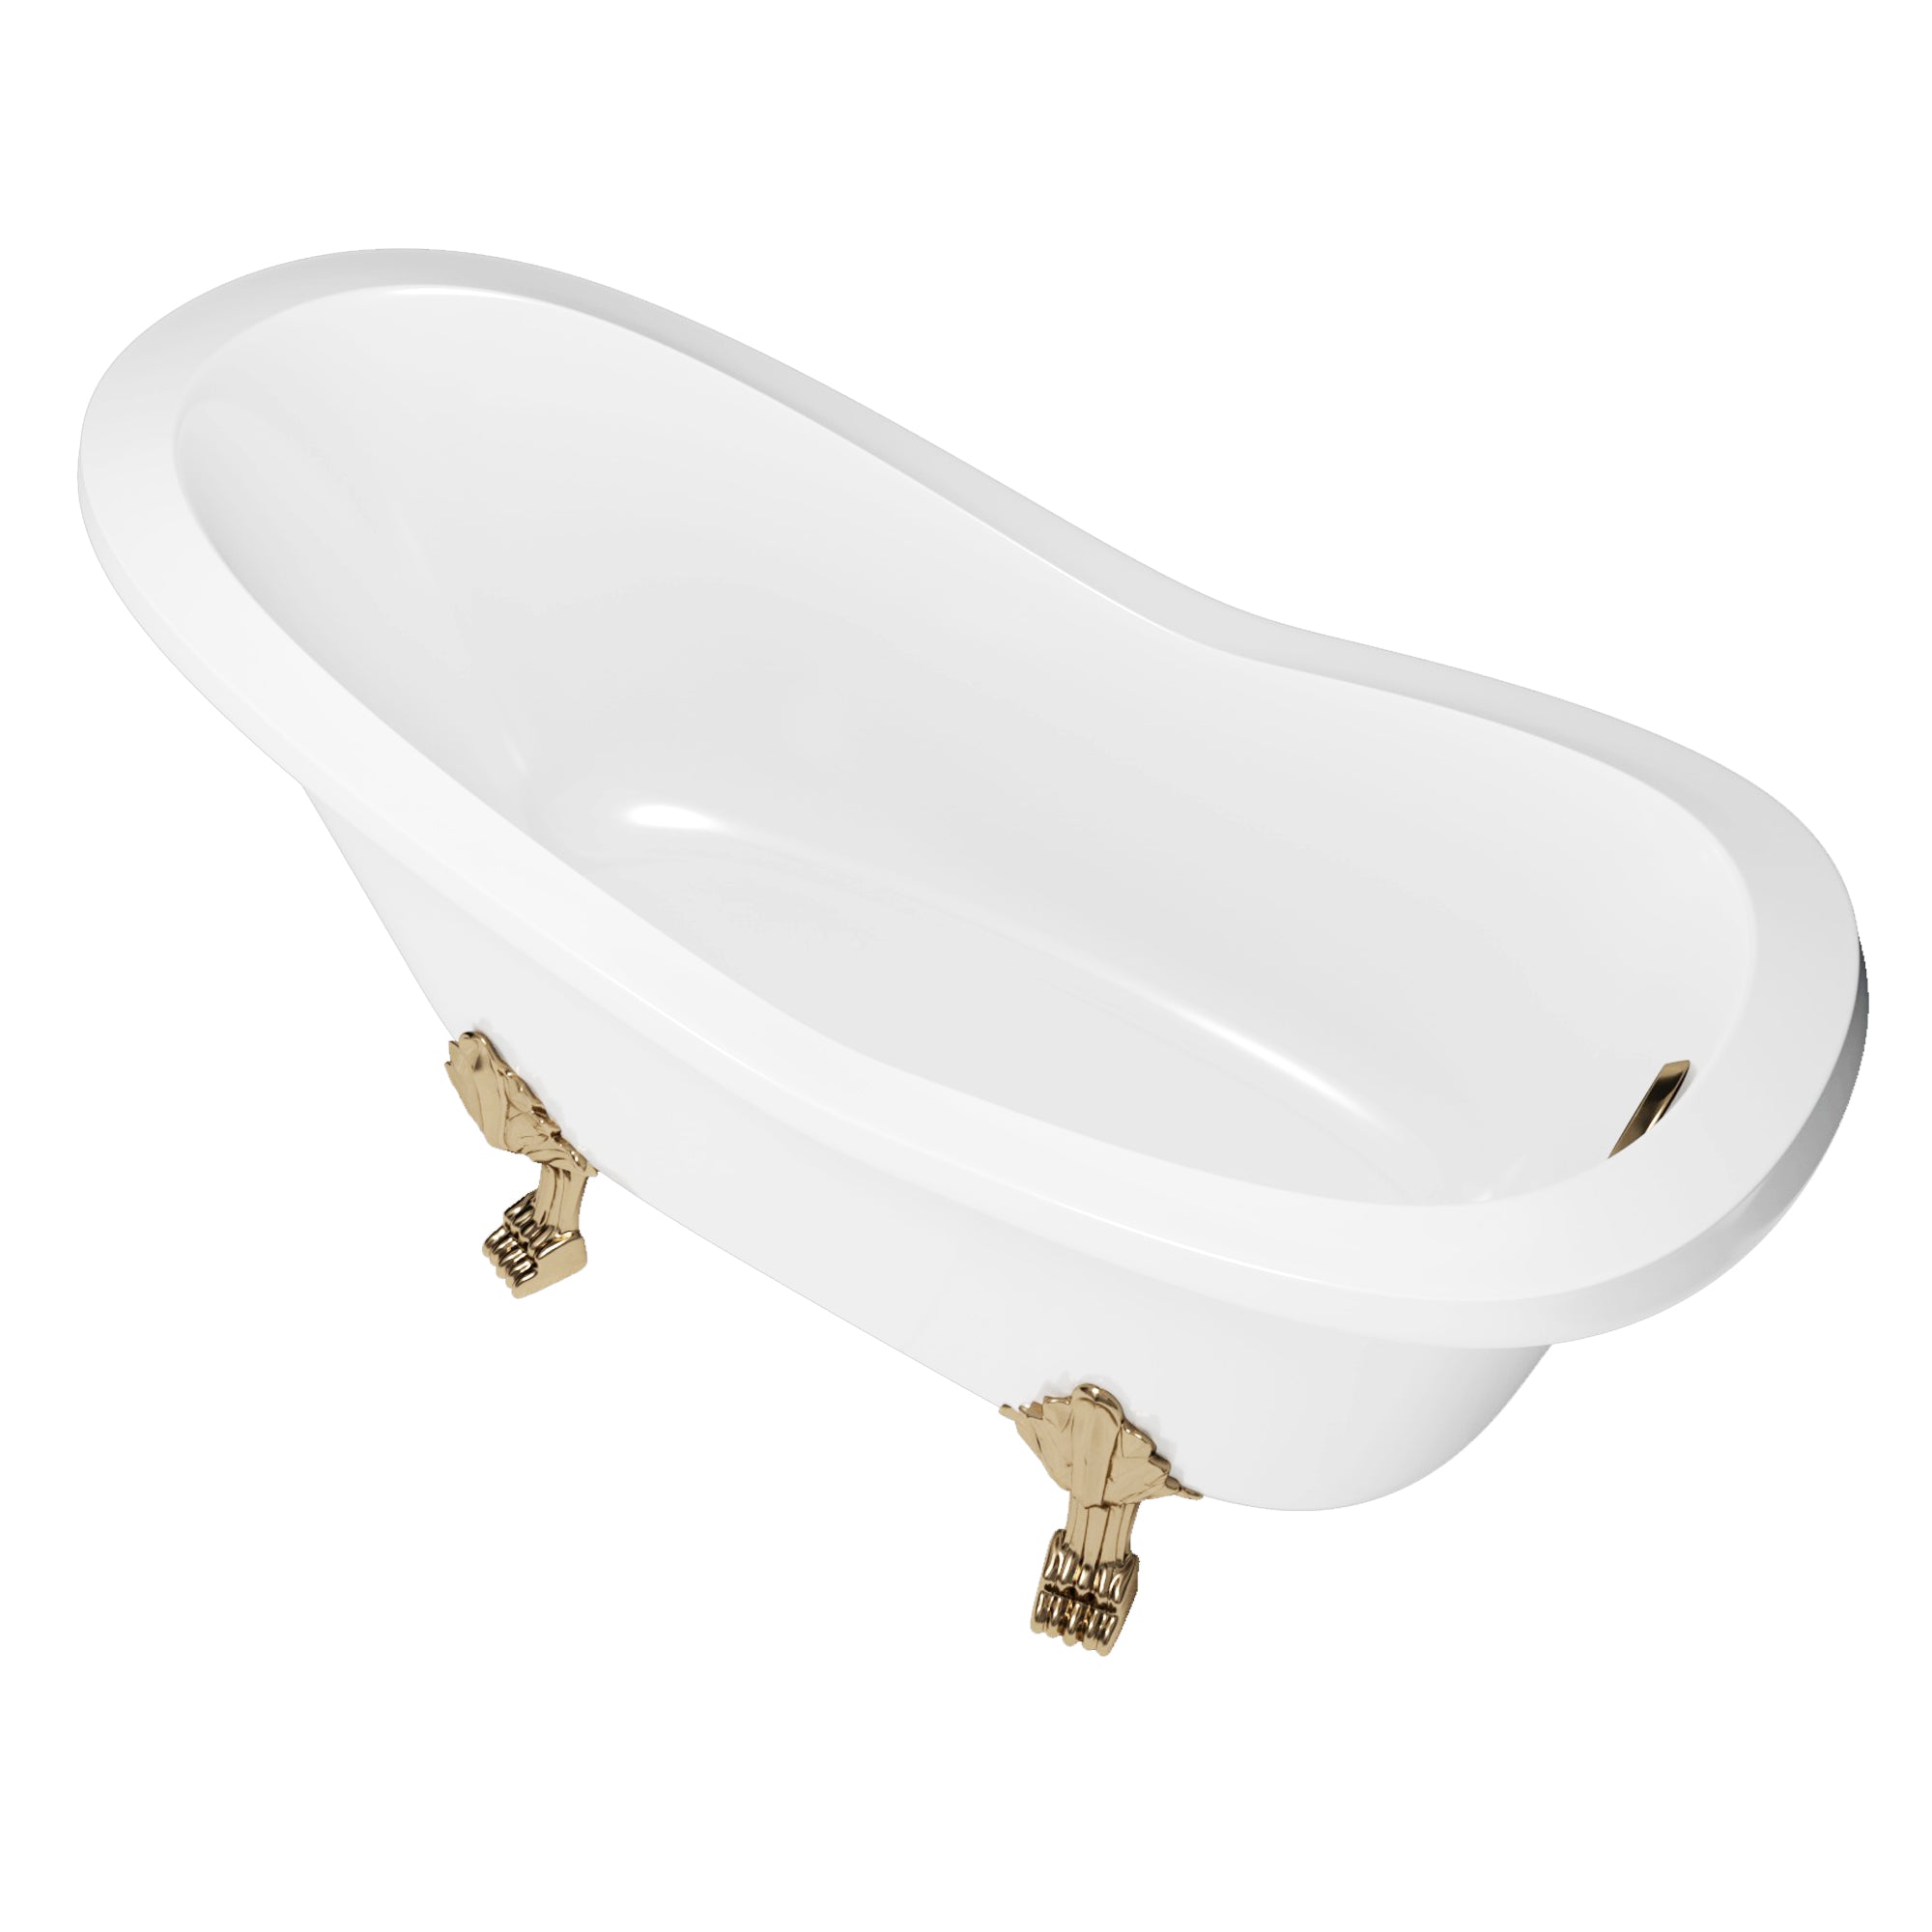 Cambridge Plumbing Slipper Dolomite Mineral Composite Clawfoot Tub with Feet (Antique Brass) and Drain Assembly - 24"H x 62"L x 30"W - ES-ST62-NH - Vital Hydrotherapy